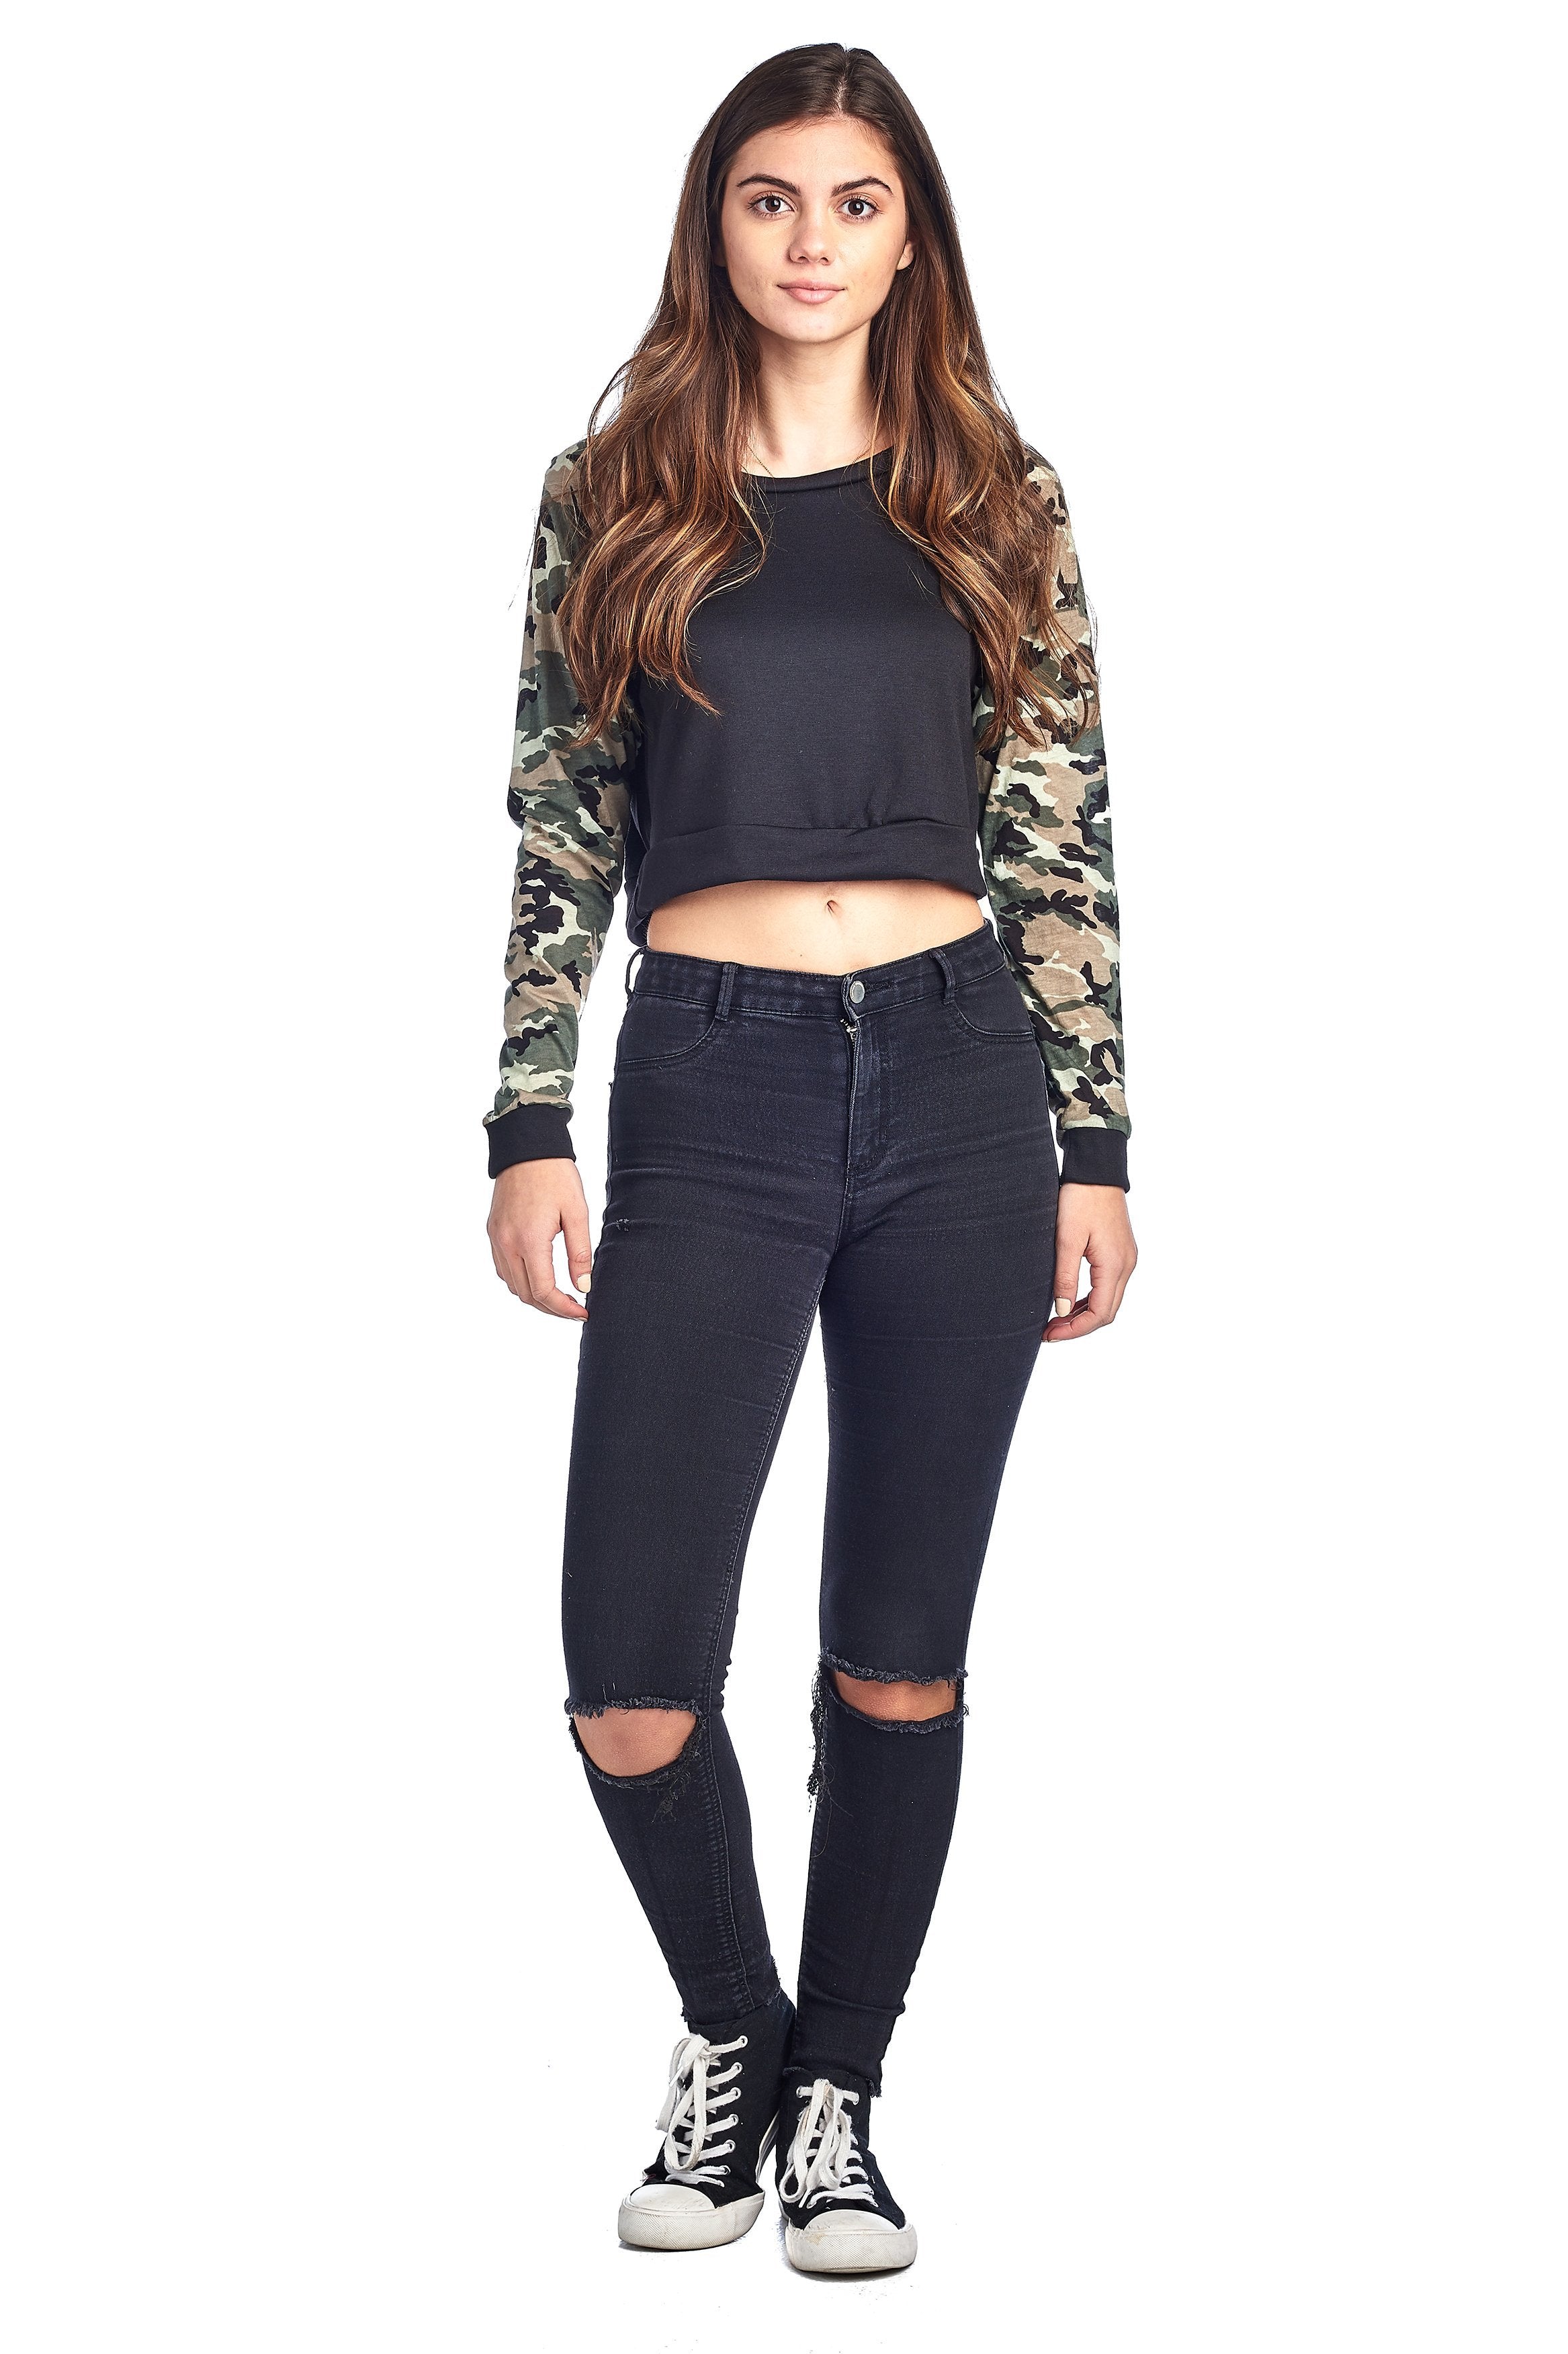 Long Sleeve Round Neck Camo Contrast Sleeves Cropped Sweatshirt Top